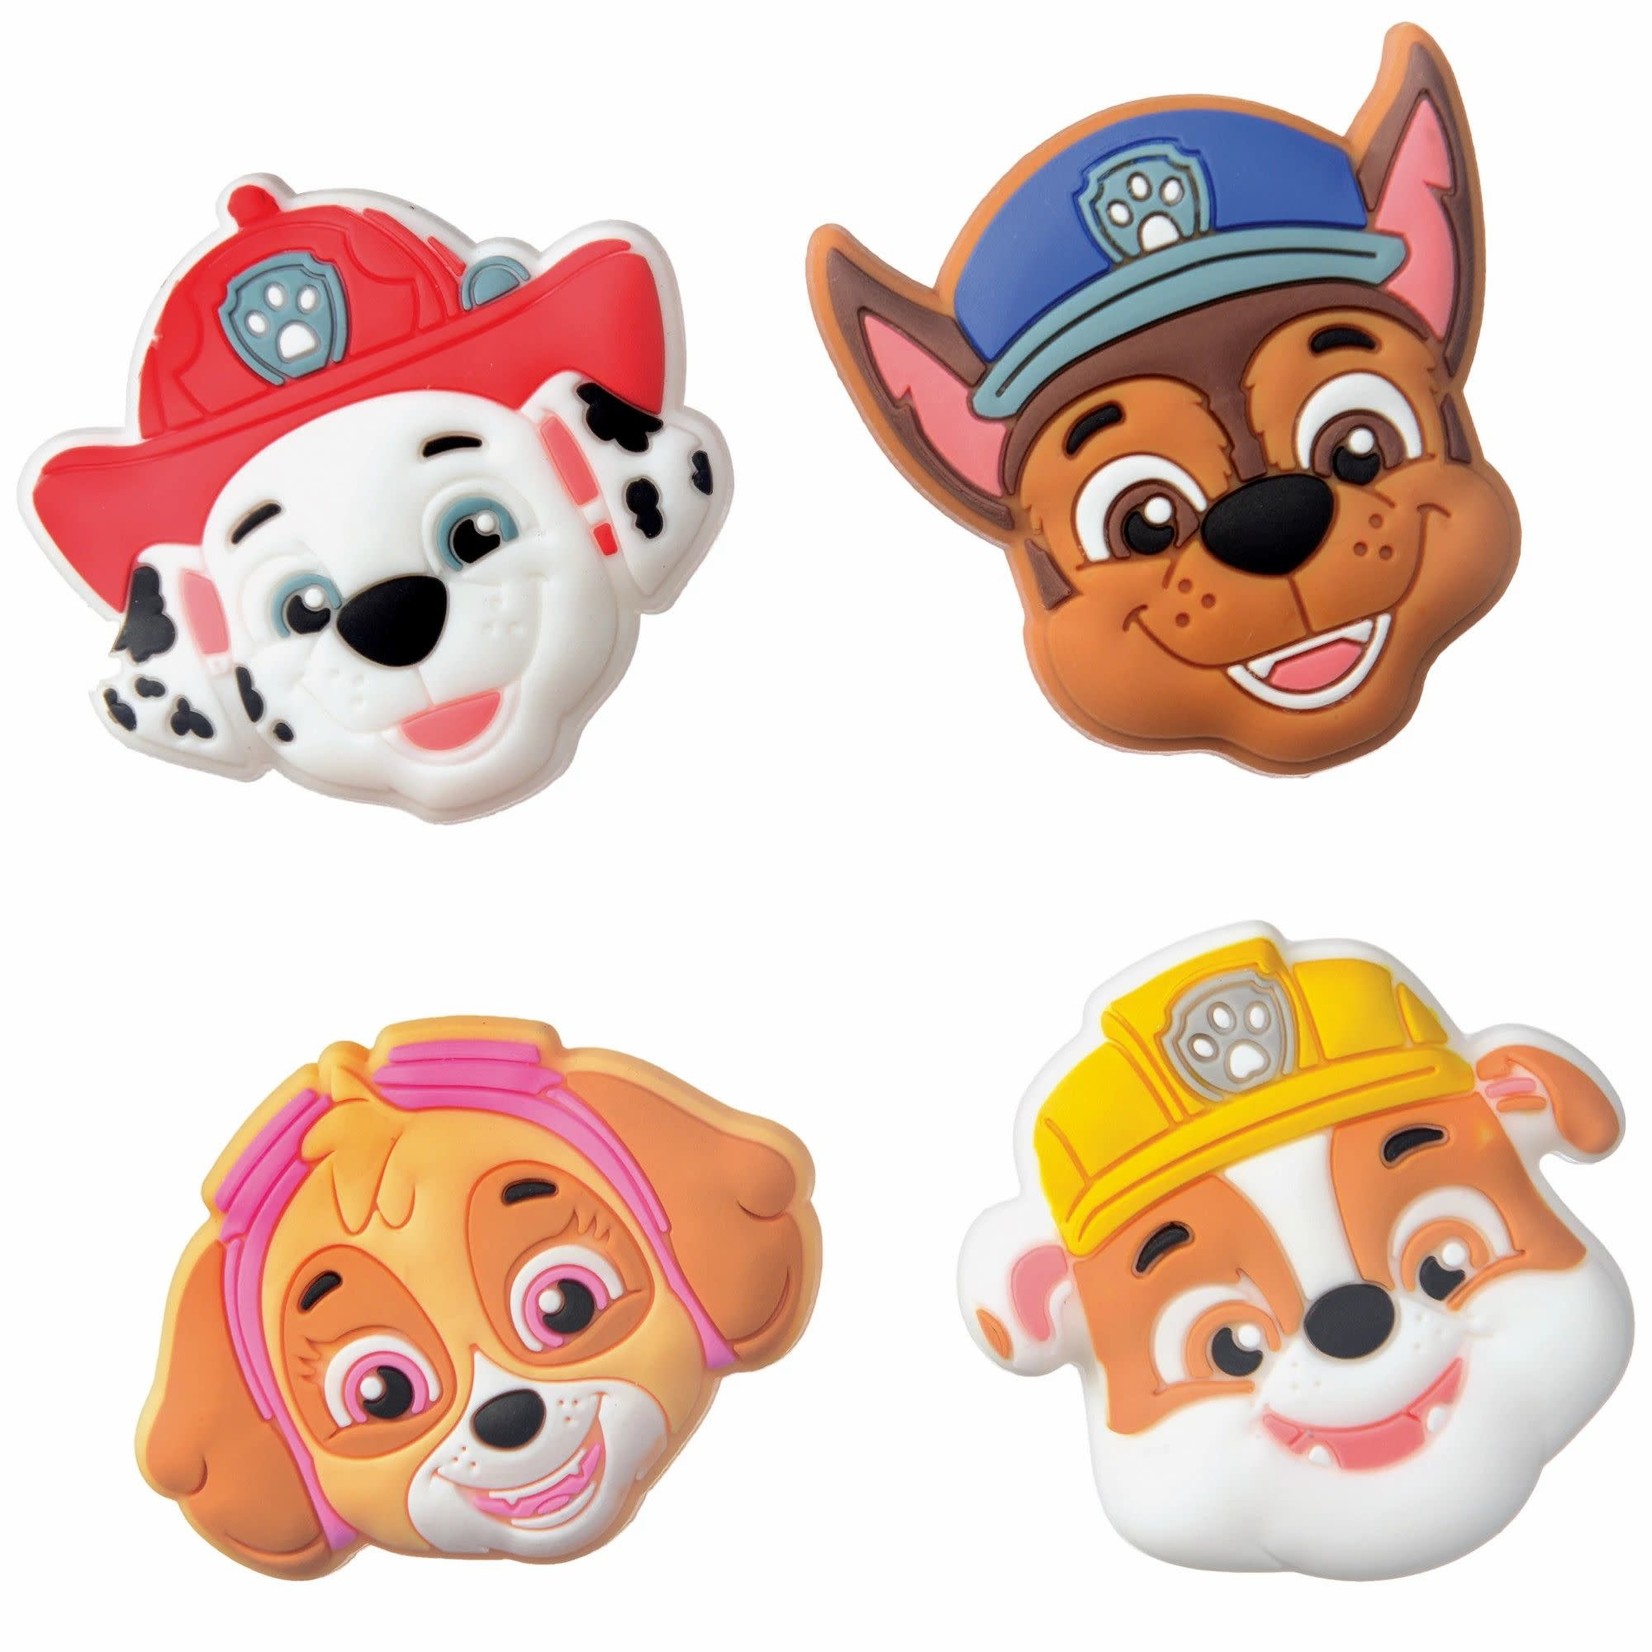 Amscan Paw Patrol Character Stickies - 4ct.